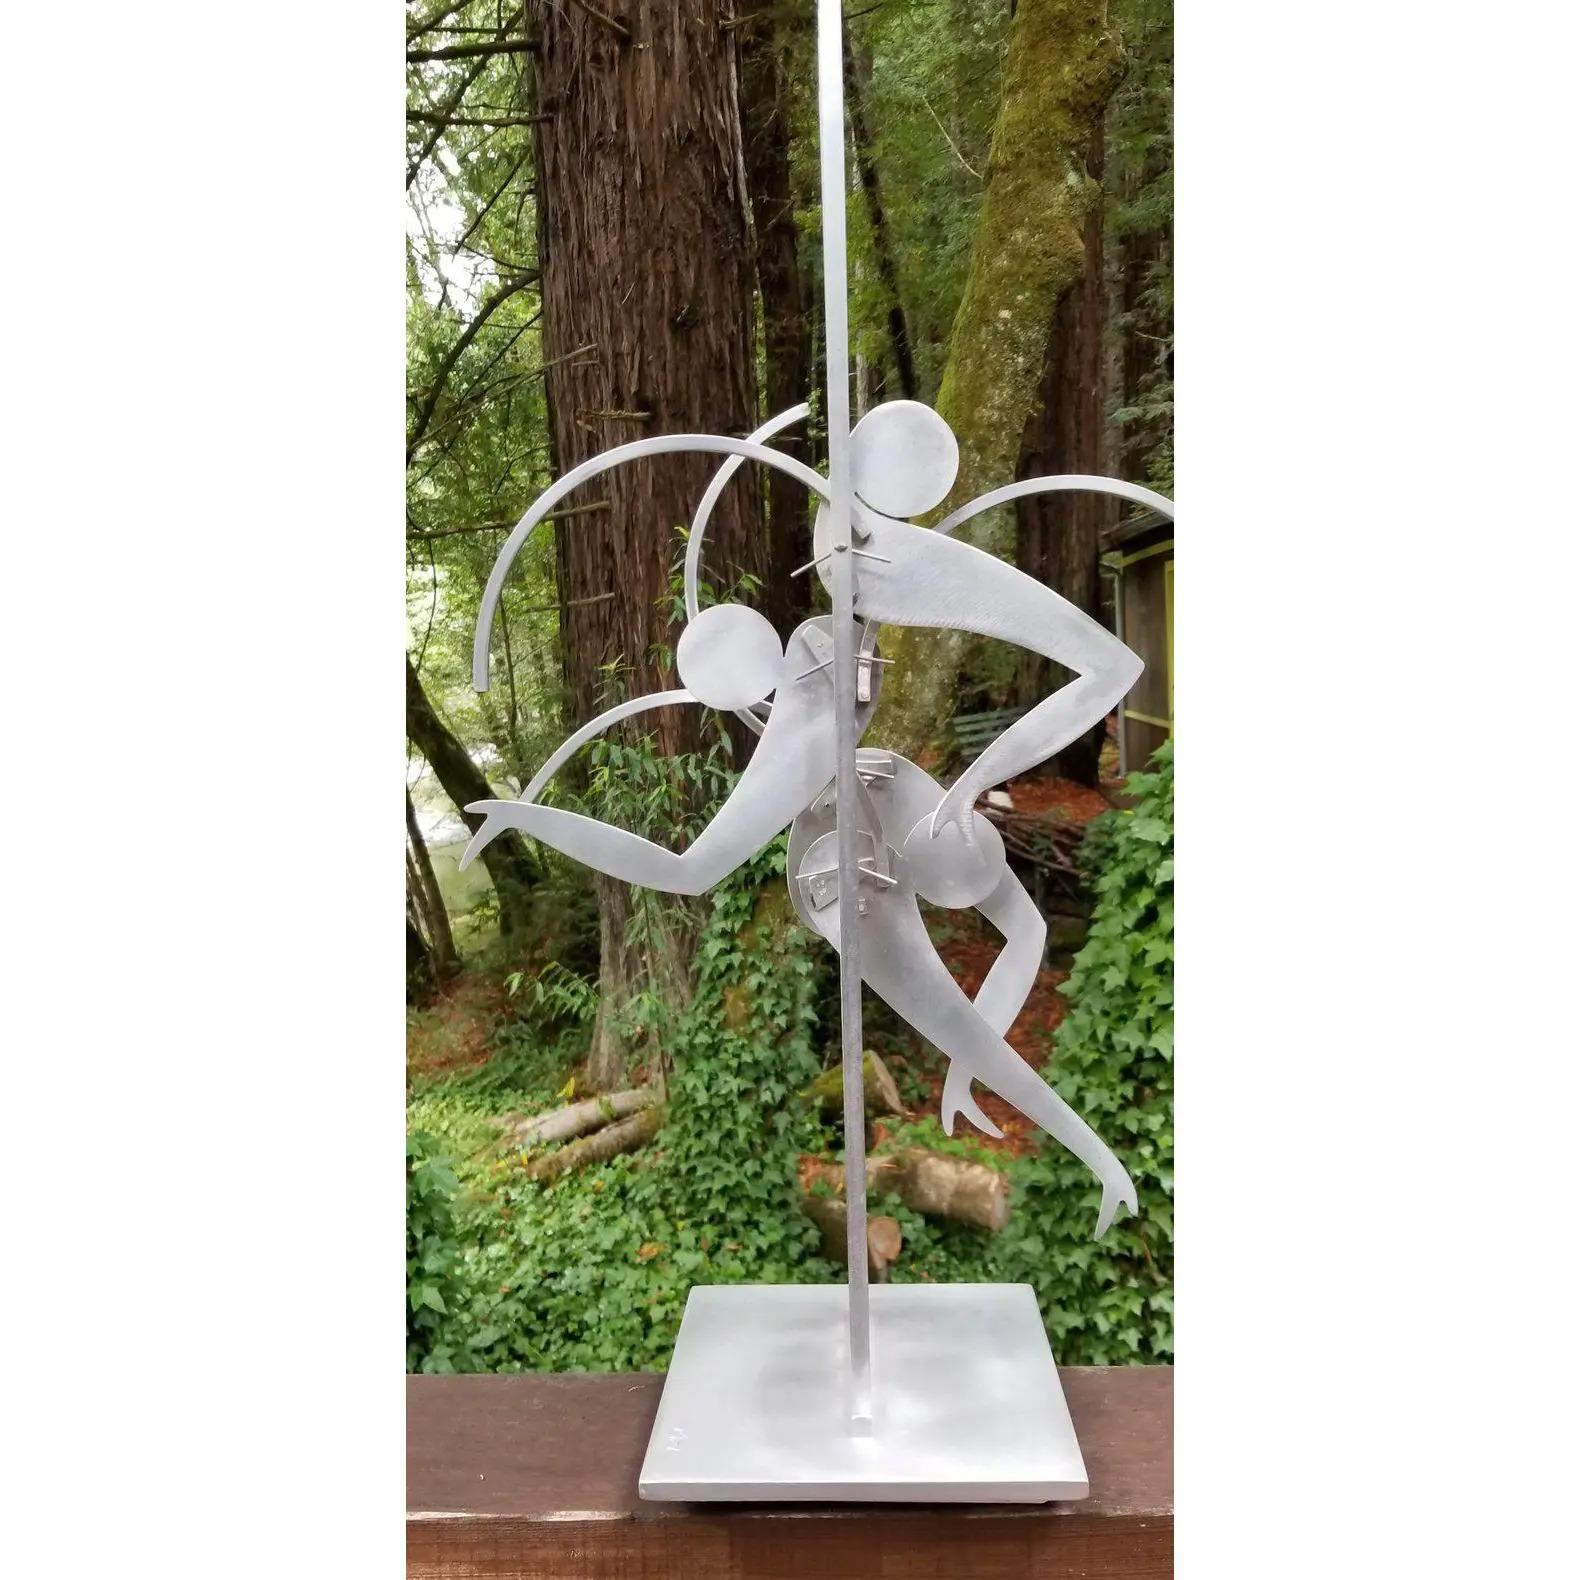 Exceptional abstract kinetic metal table top sculpture by Jerome Kirk. Dancing figures, signed and dated 1995. Sculpture base measures 8